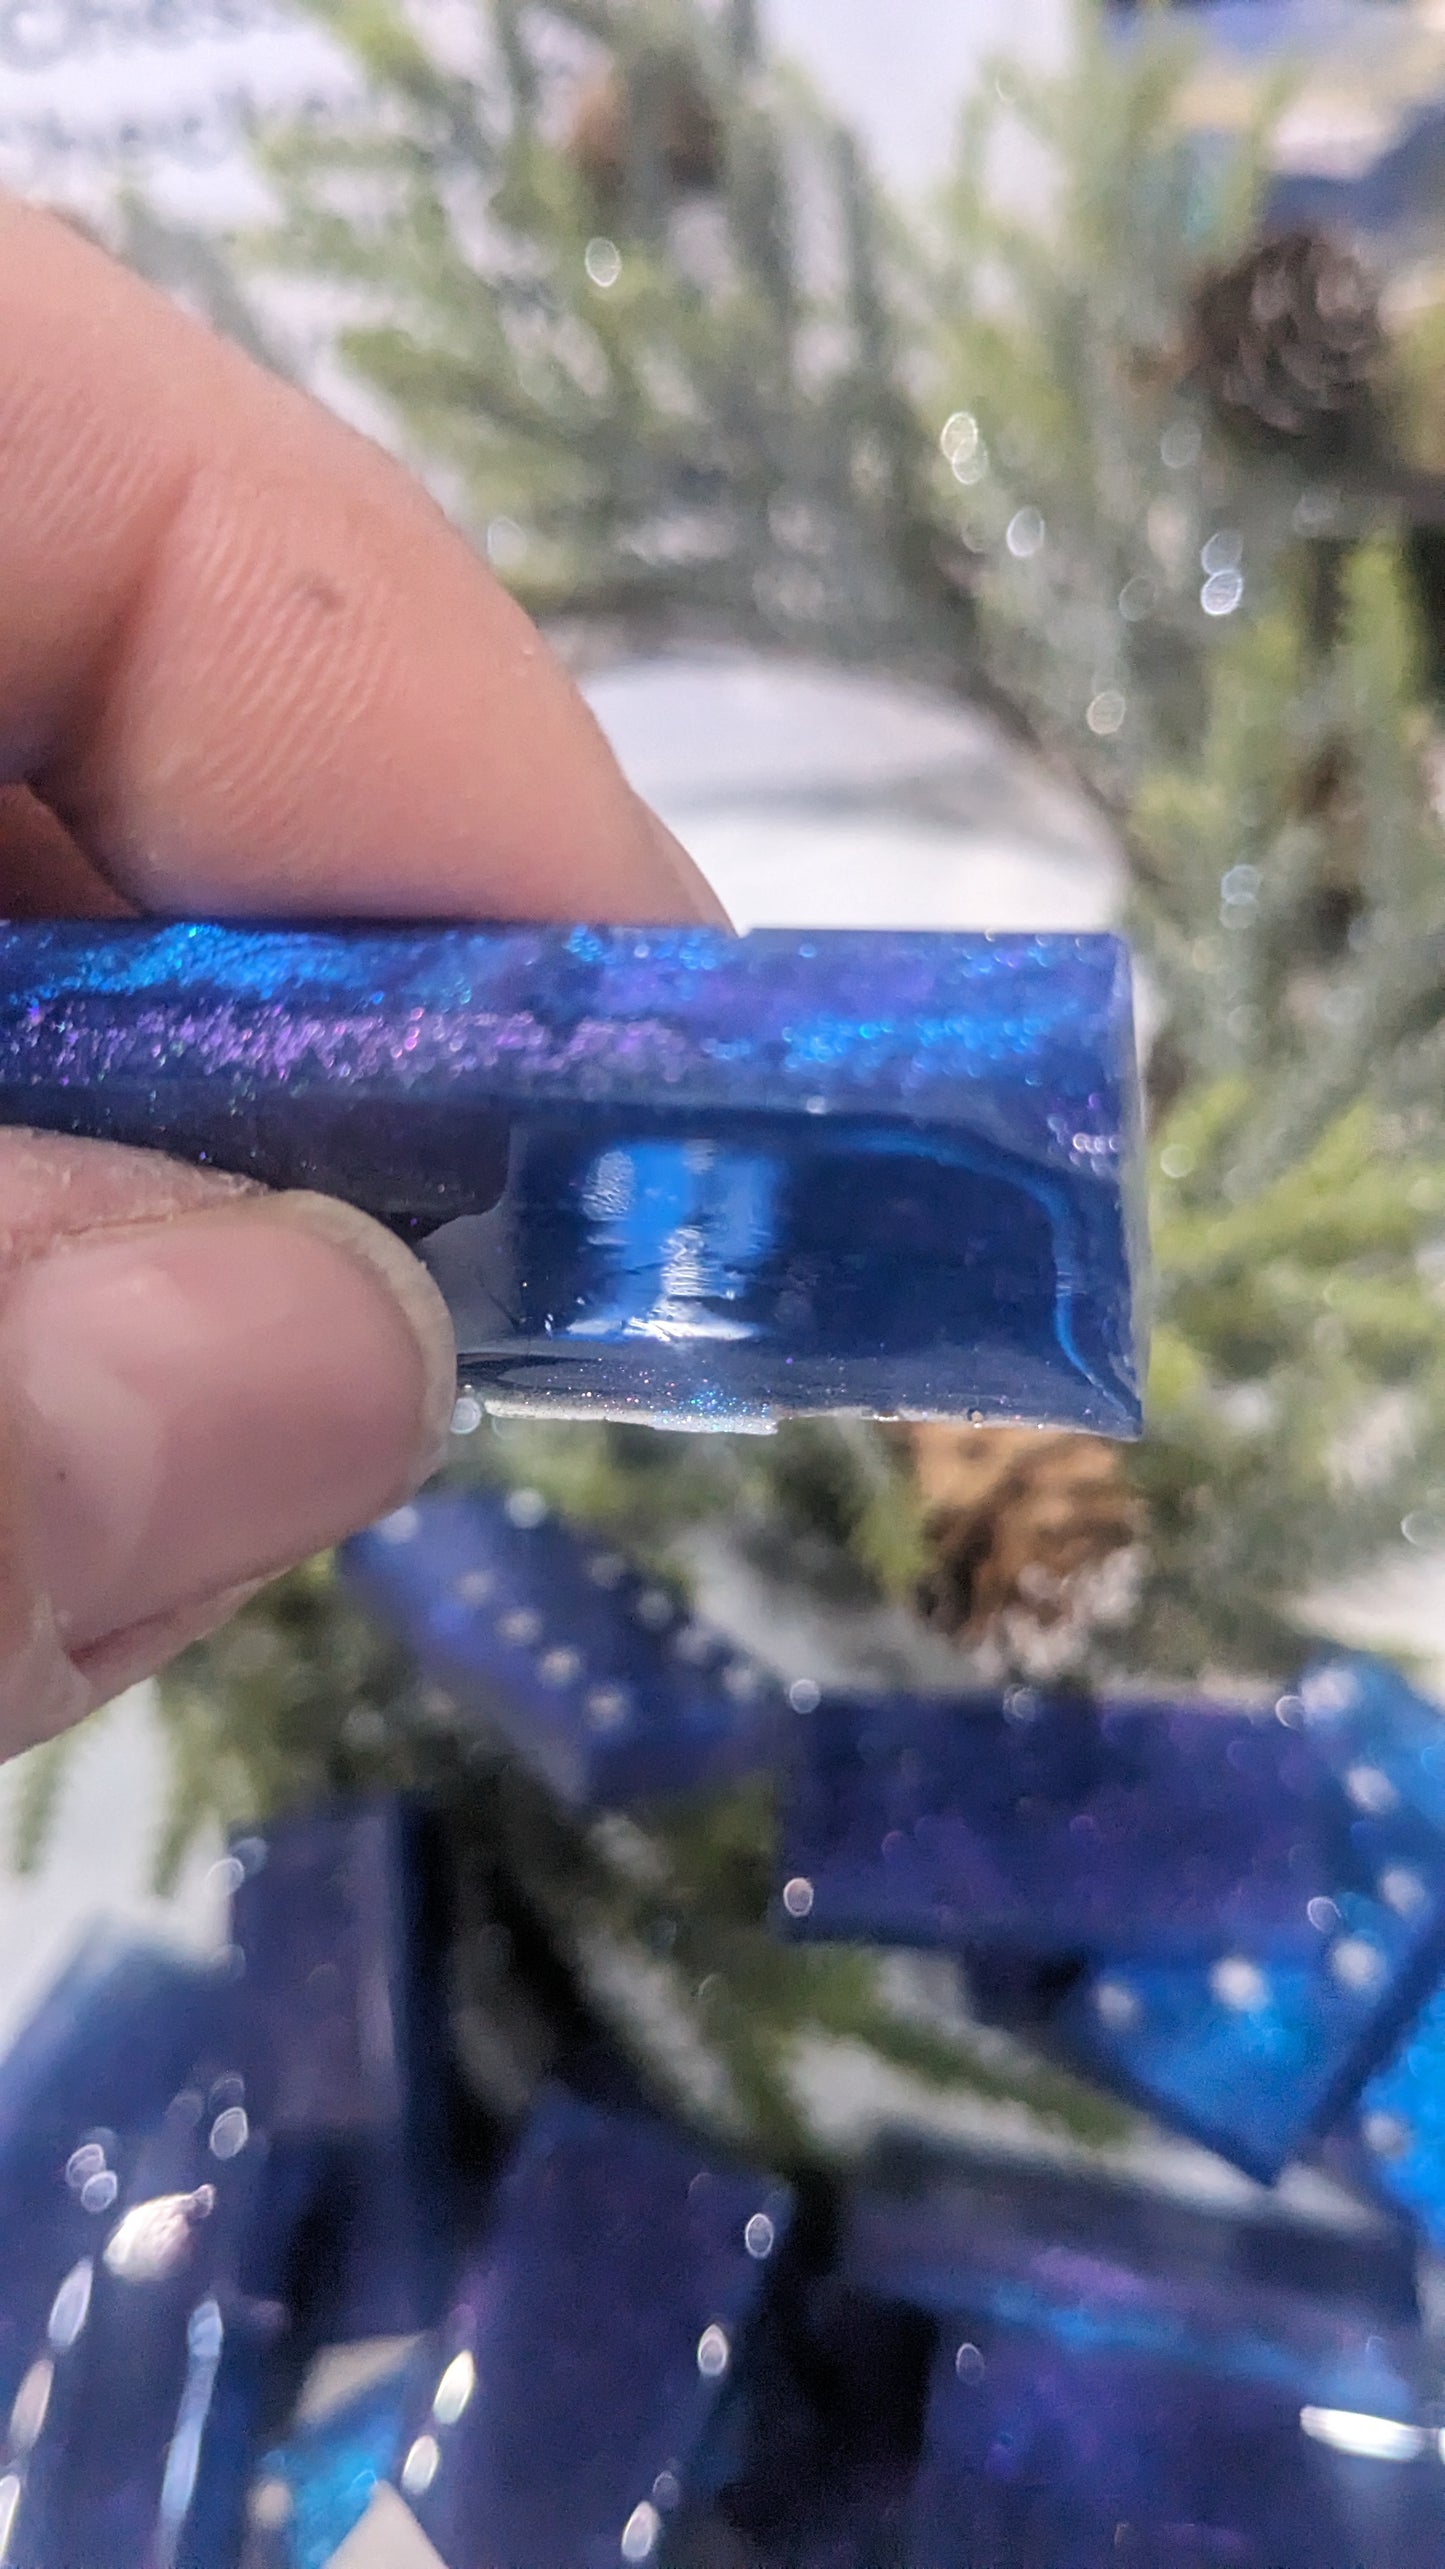 This is a set of handcrafted resin dominoes color changing blue and purple